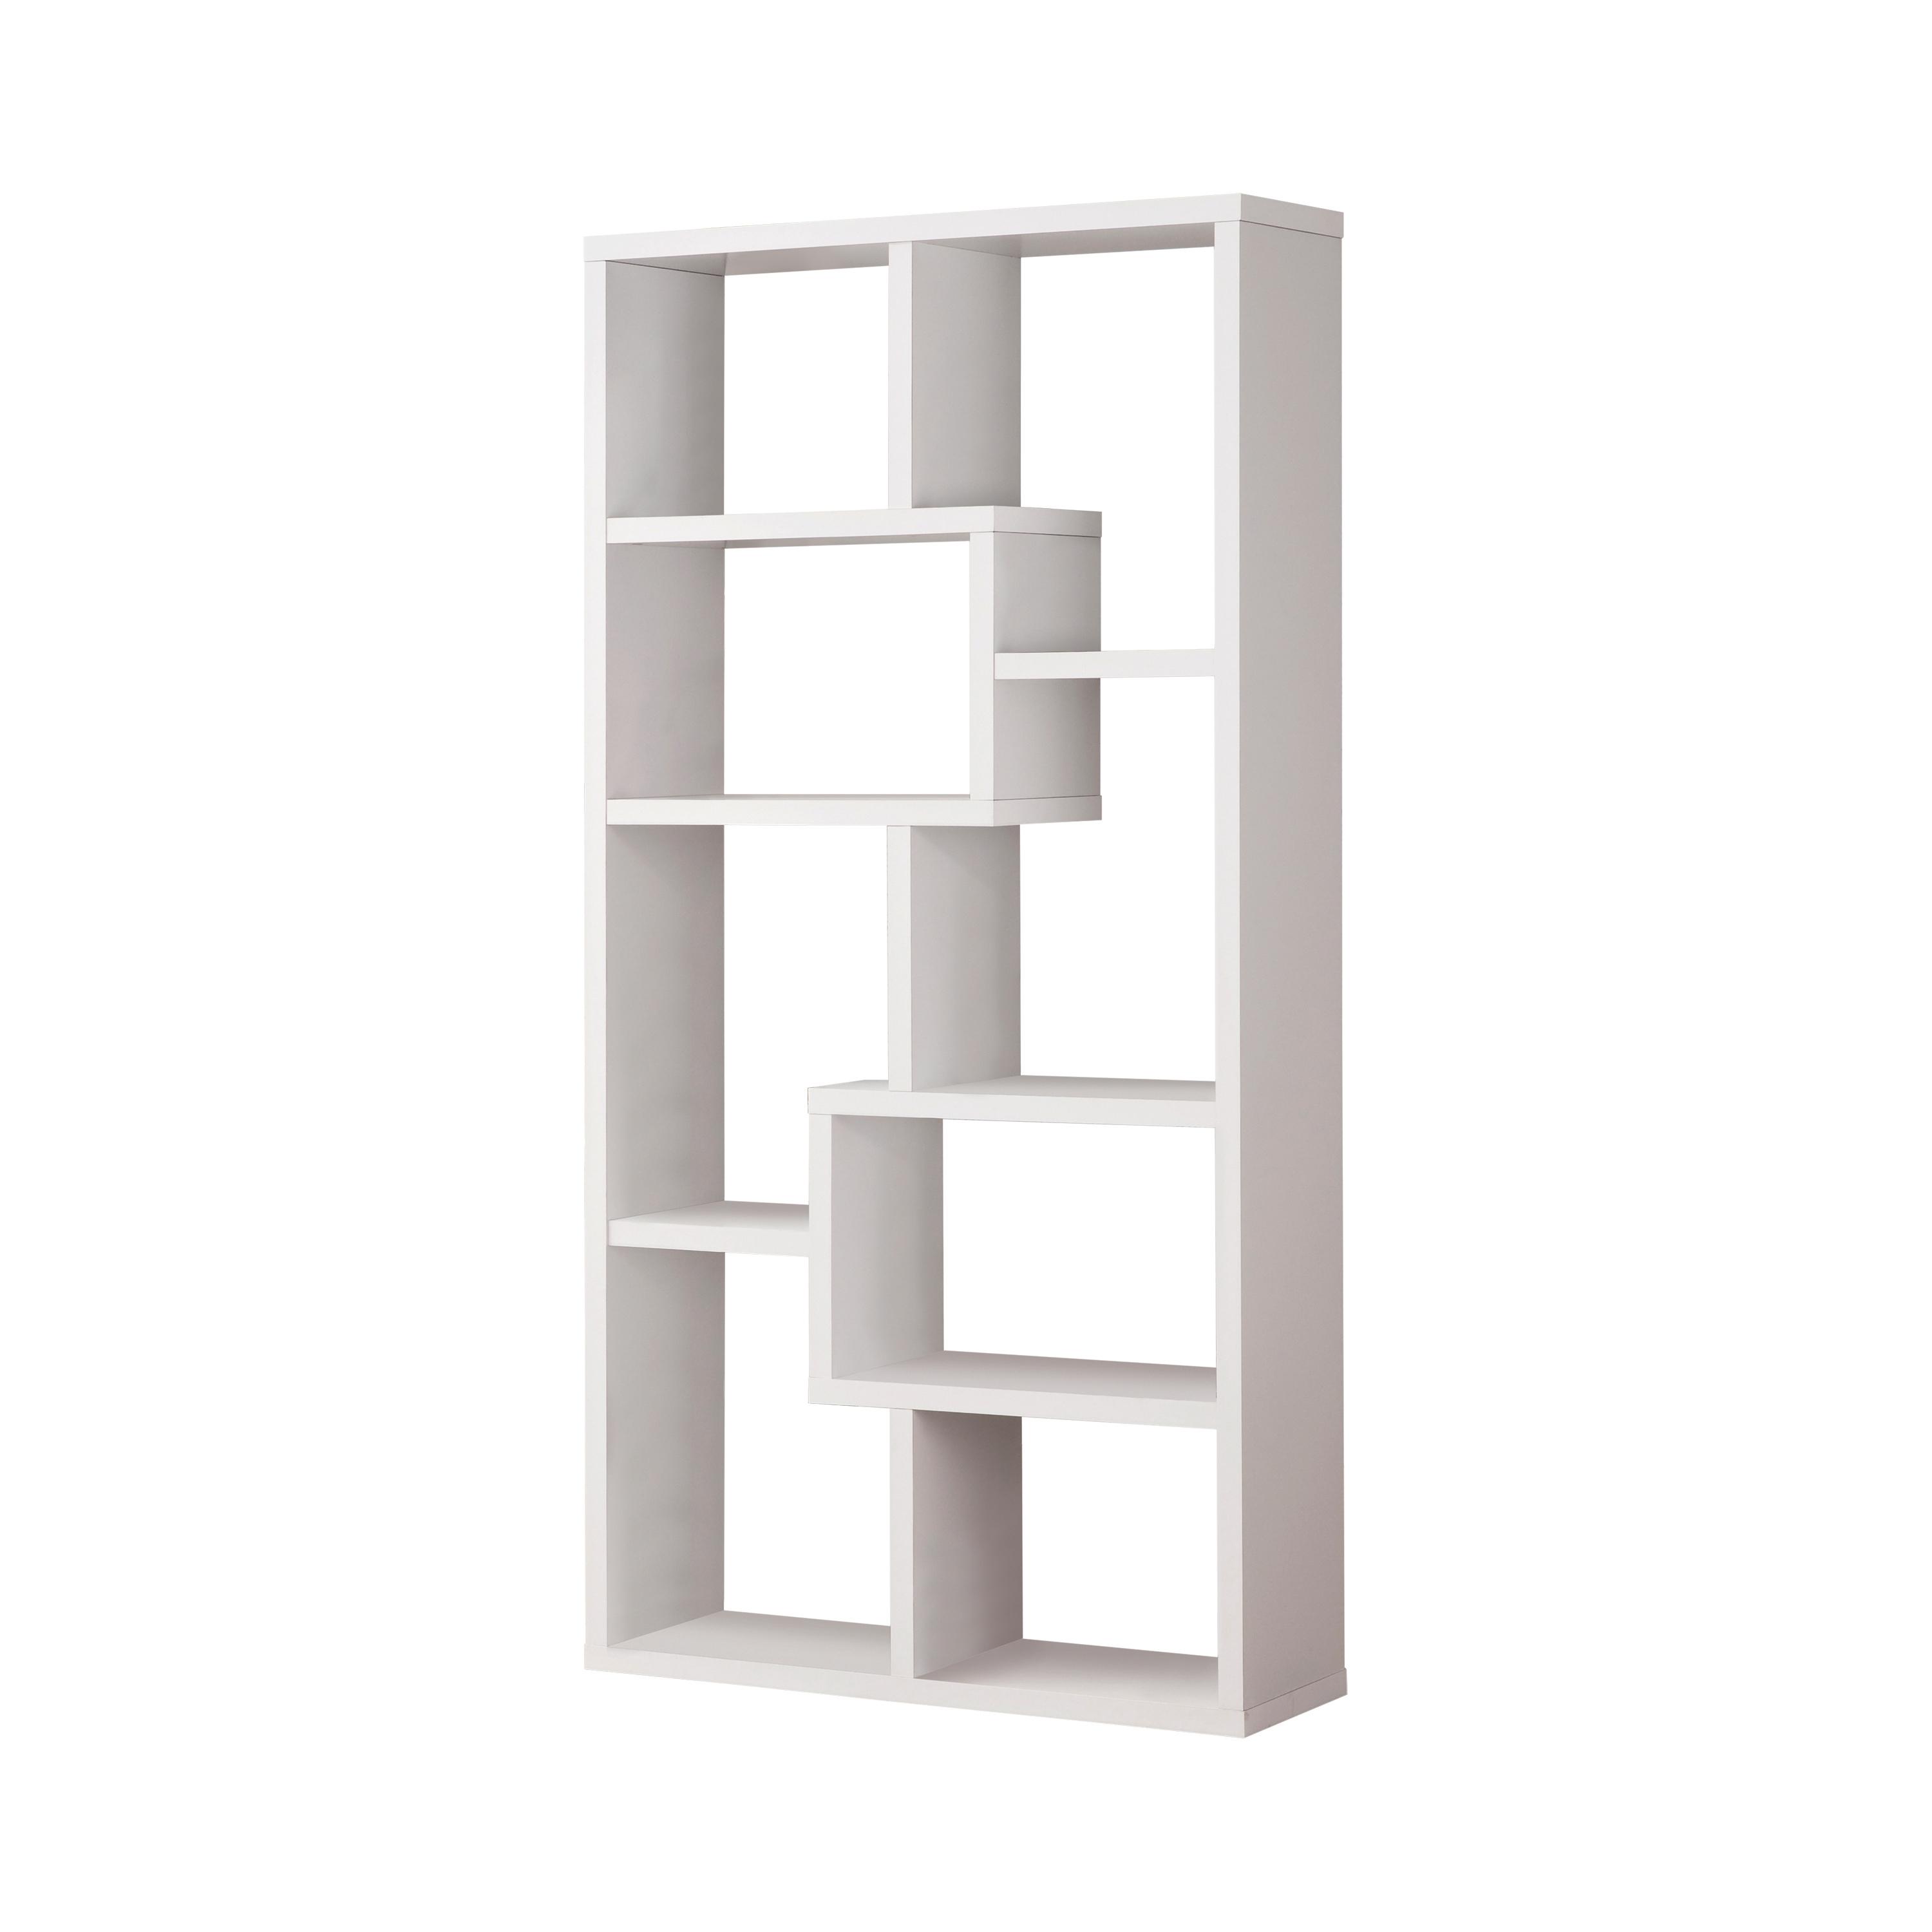 Transitional Bookcase 800136 Theo 800136 in White 